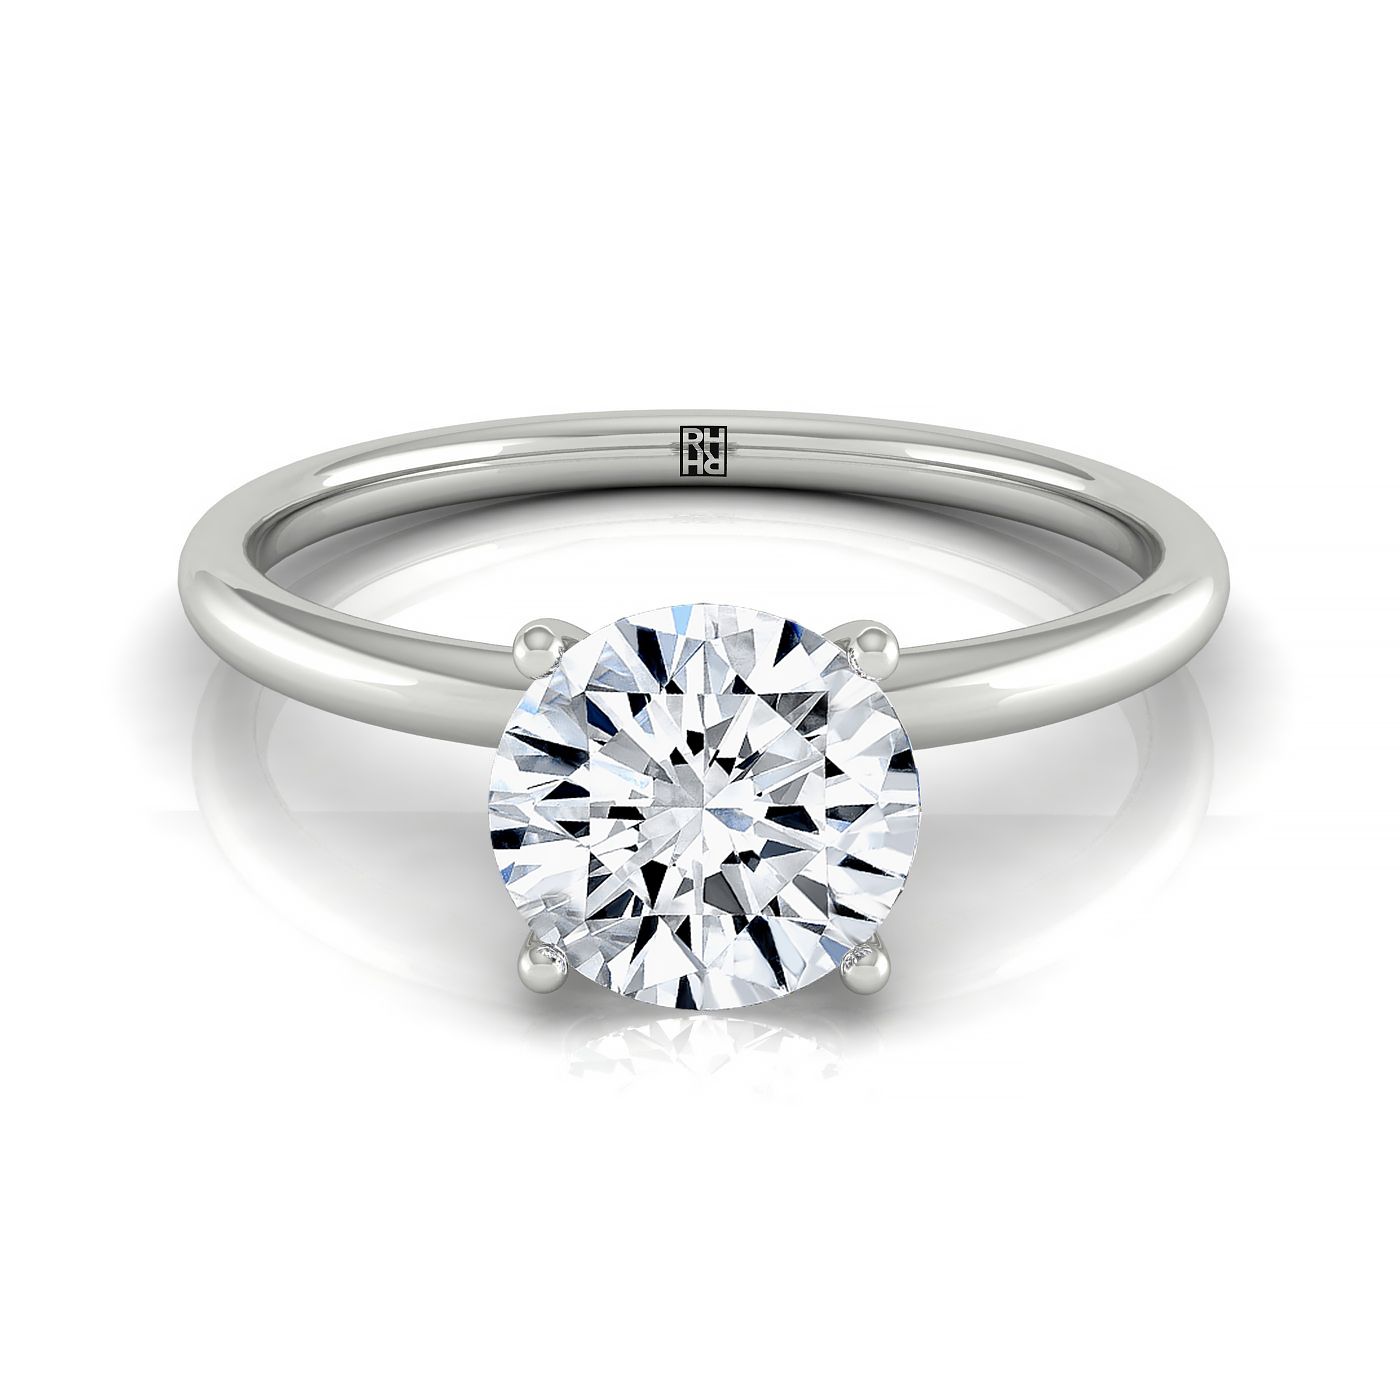 14kw Round Solitaire Engagement Ring With Hidden Halo With 8 Prong Set Round Diamonds